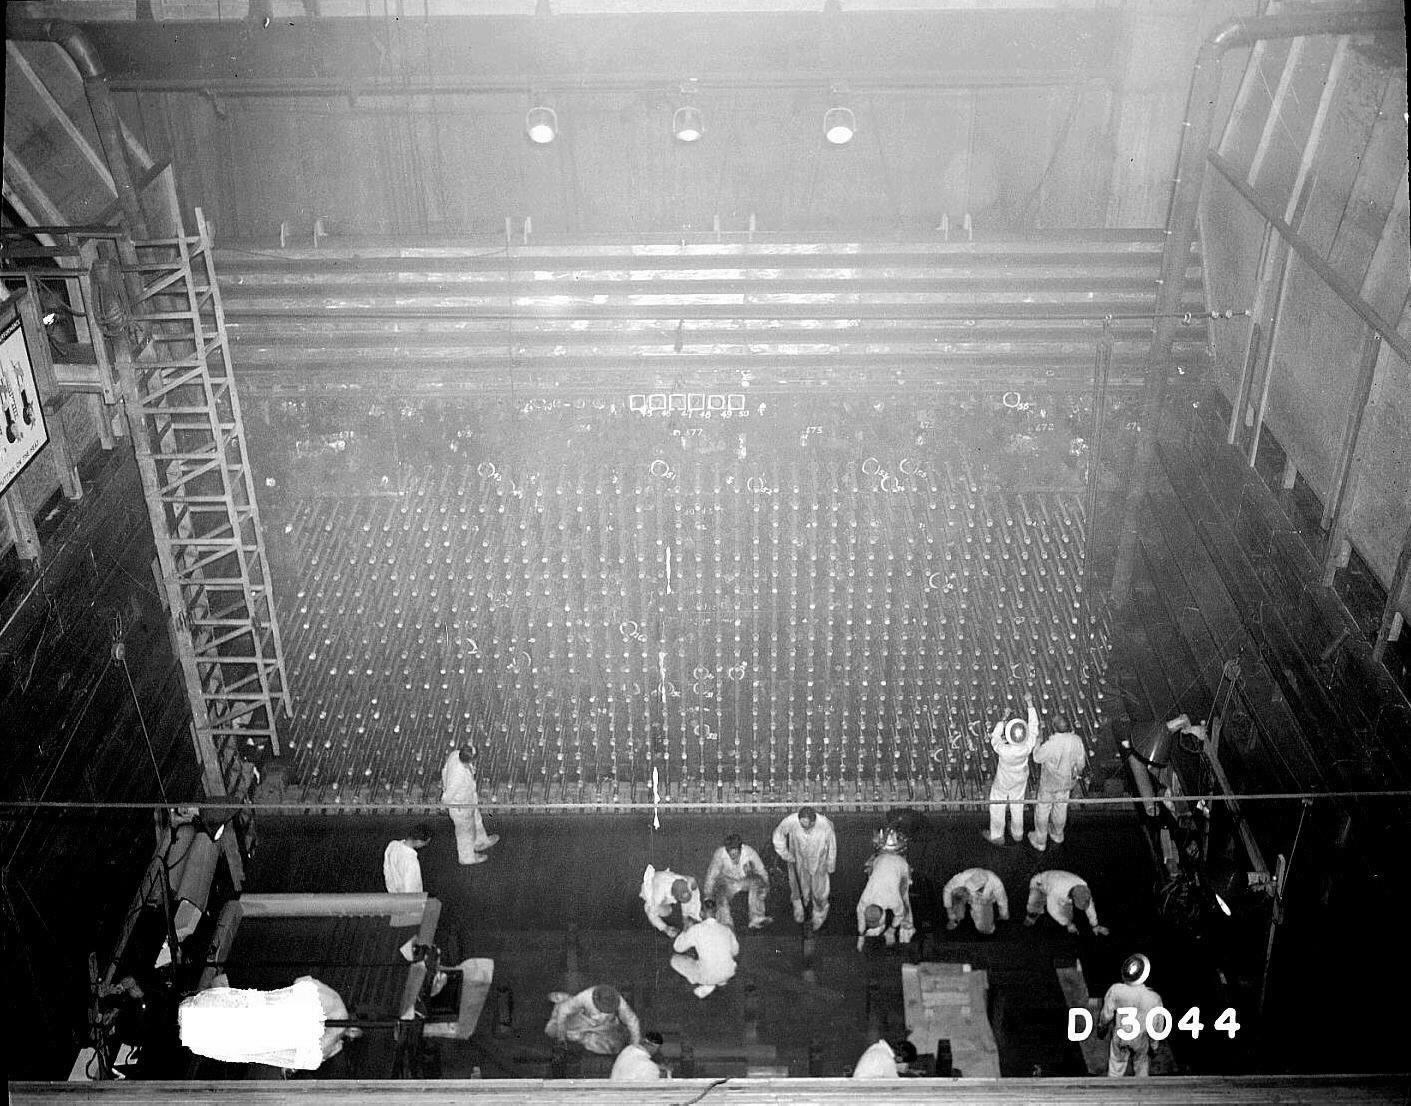 This photograph shows men in white around a giant reactor making adjustments.